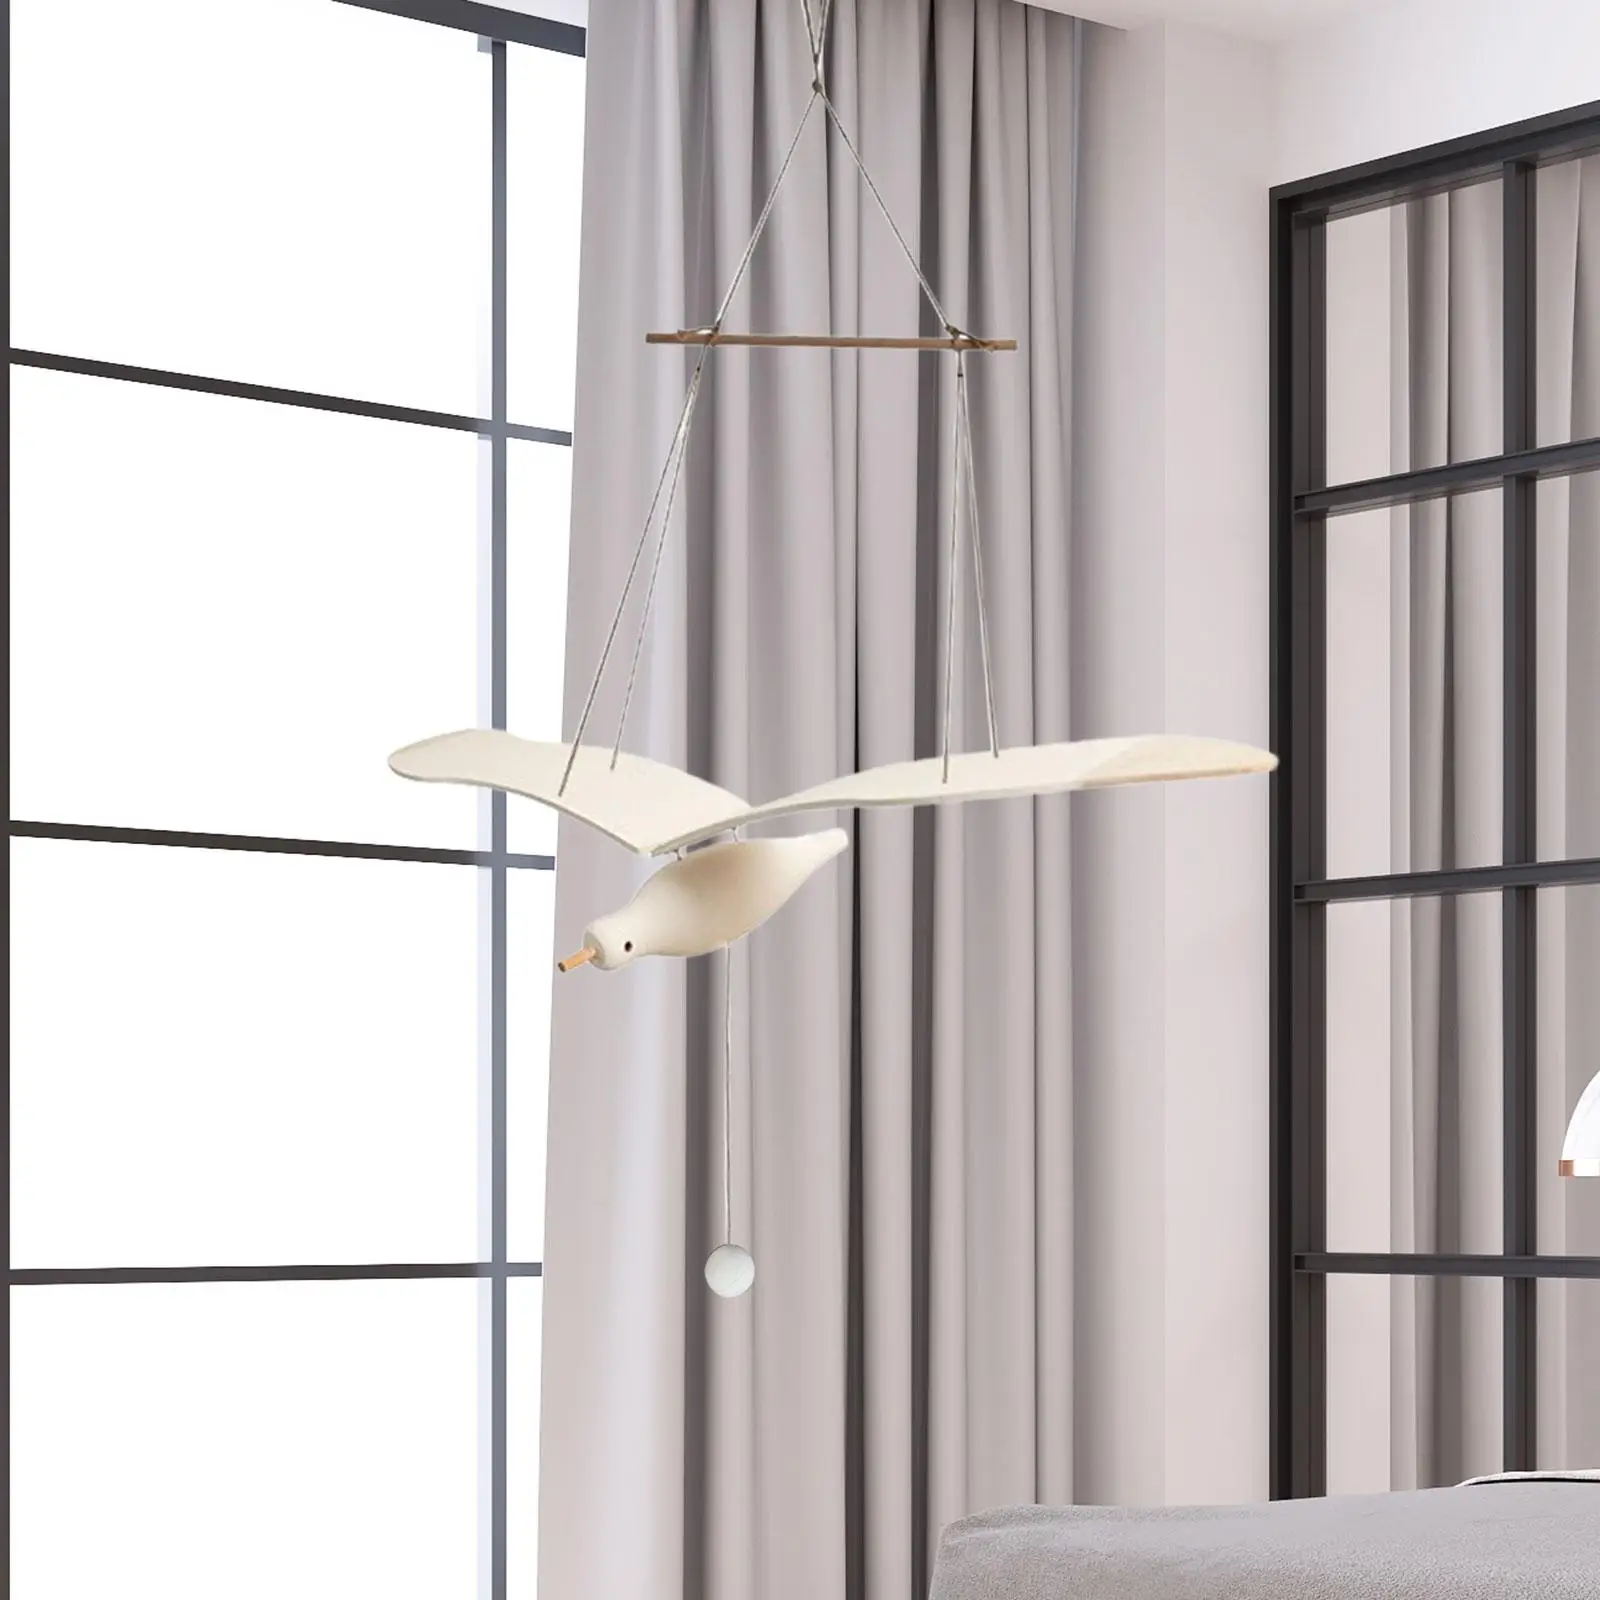 Seagull Mobile Pendant Wood Seagull Decor Hanging Soaring Seagulls for Living Room Home Window Balcony Indoor Outdoor